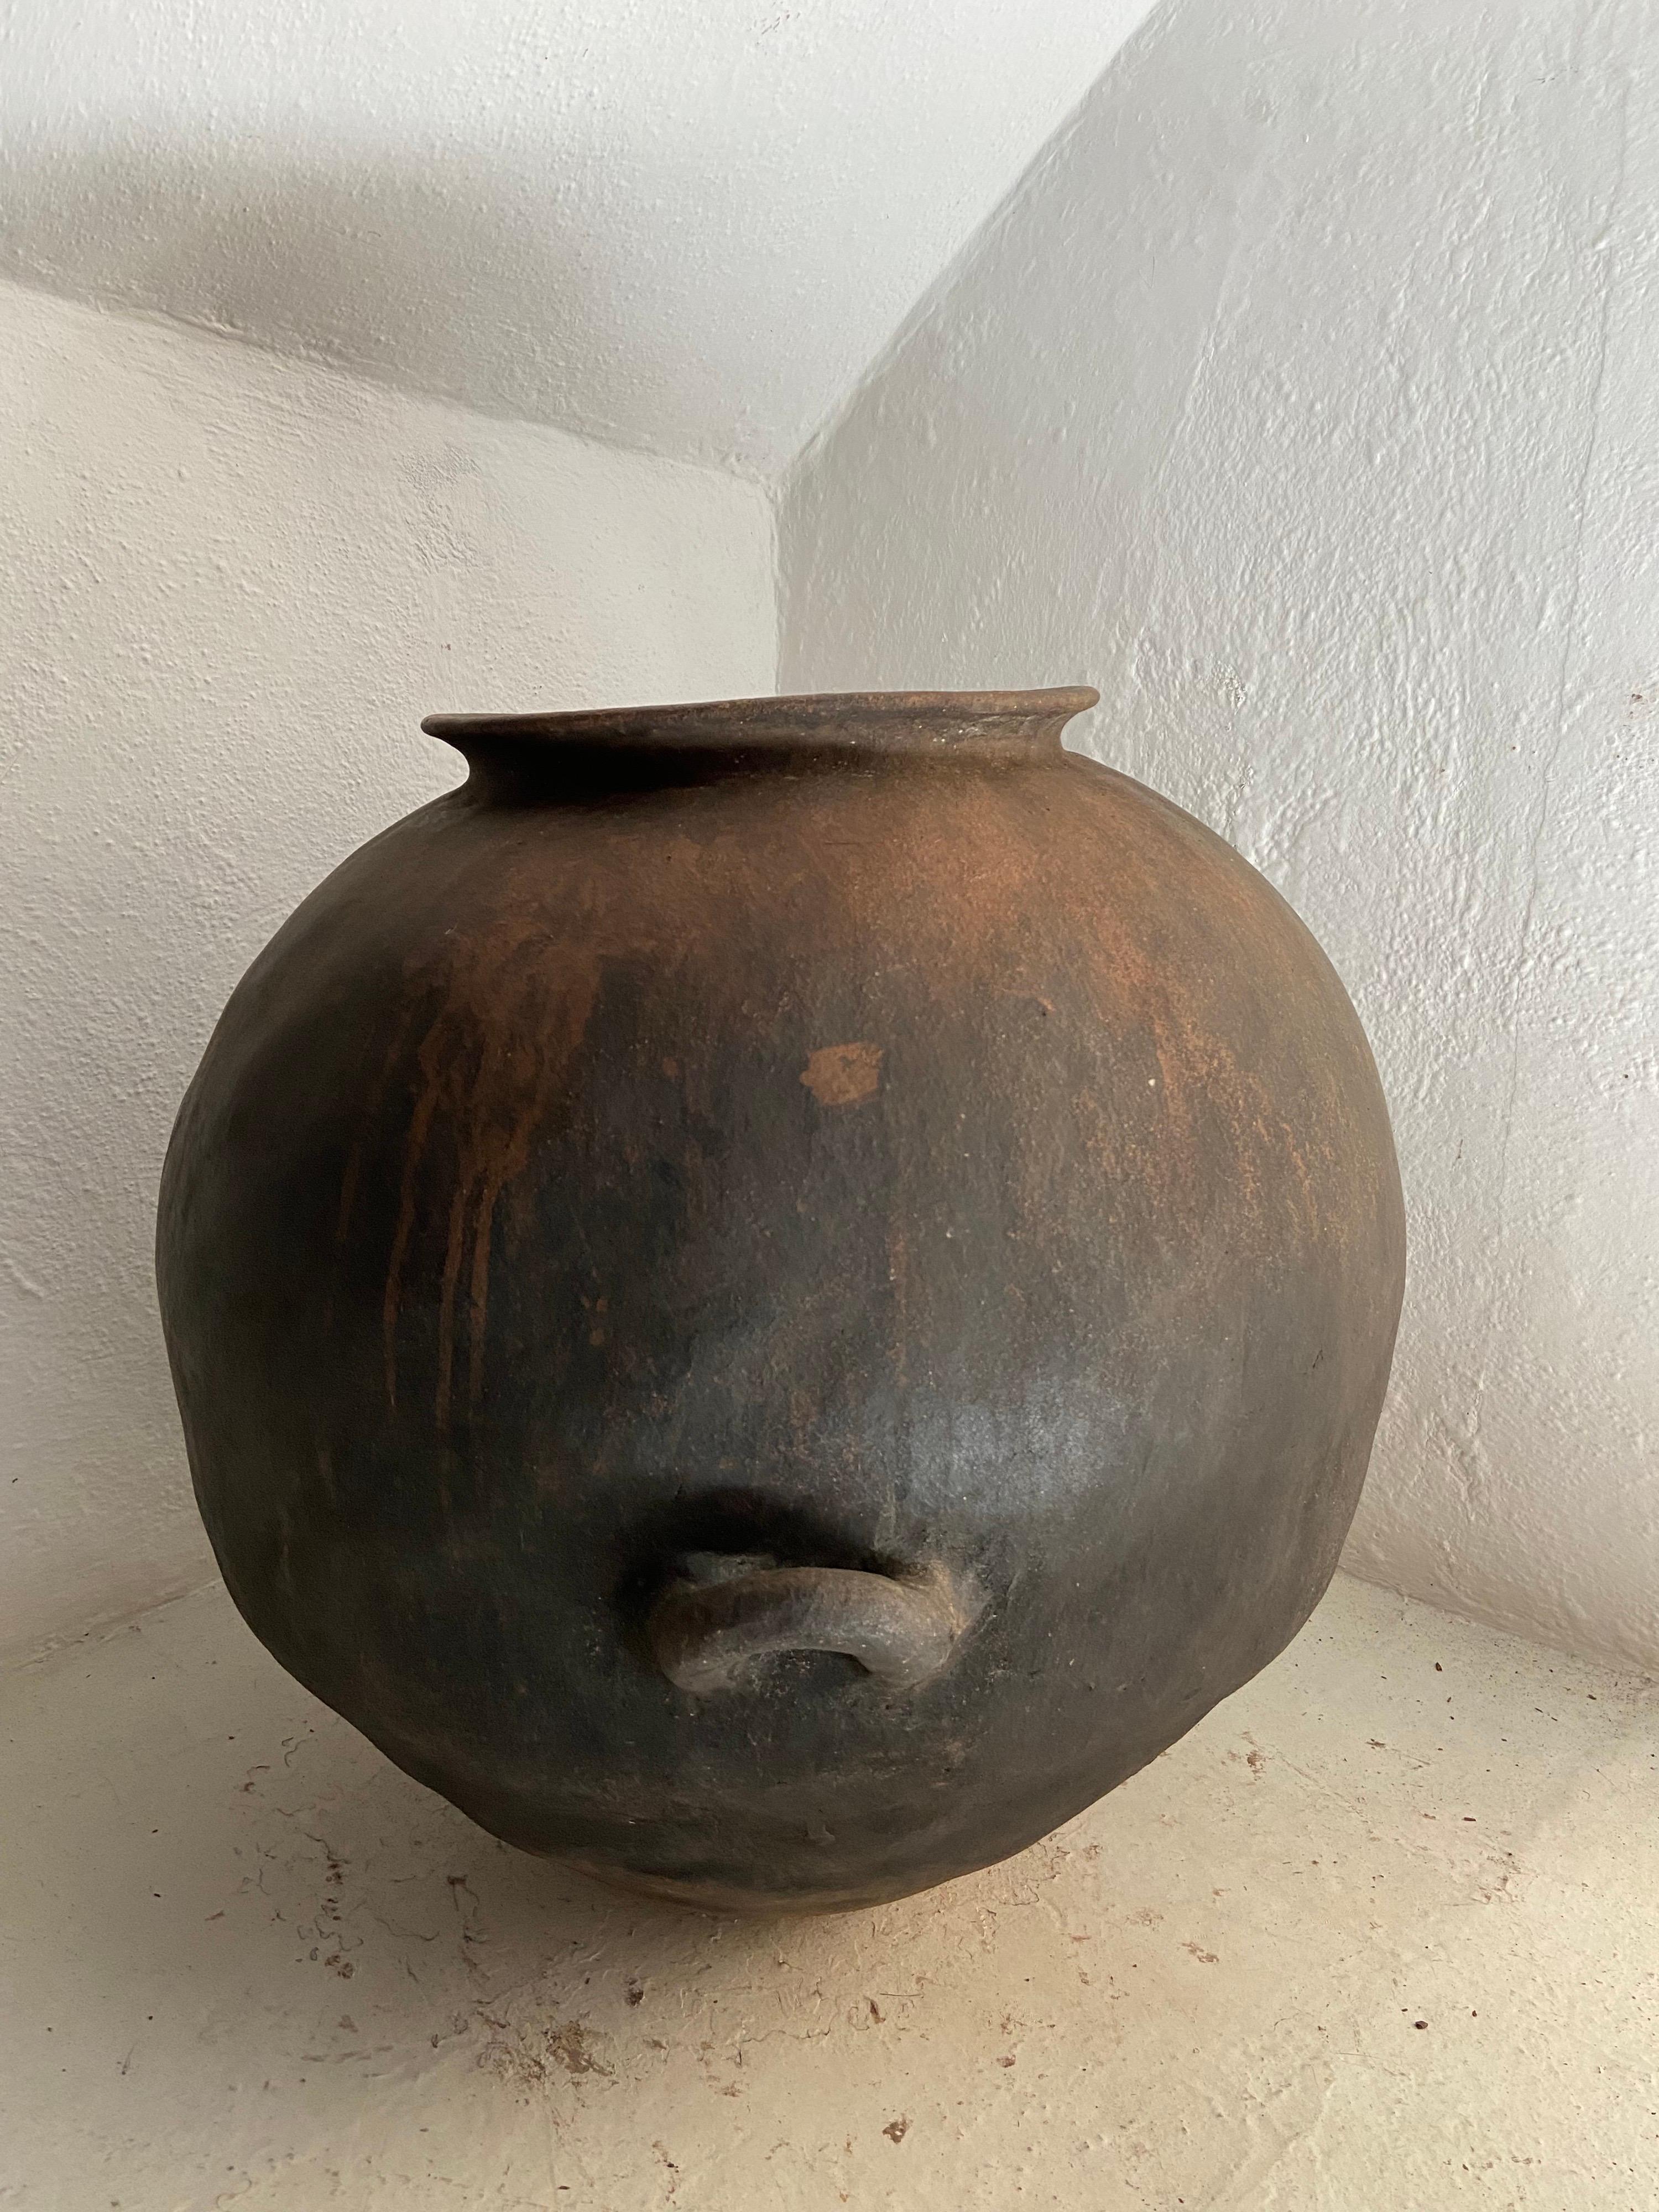 Hand-Crafted 19th Century Water Jar From Mexico